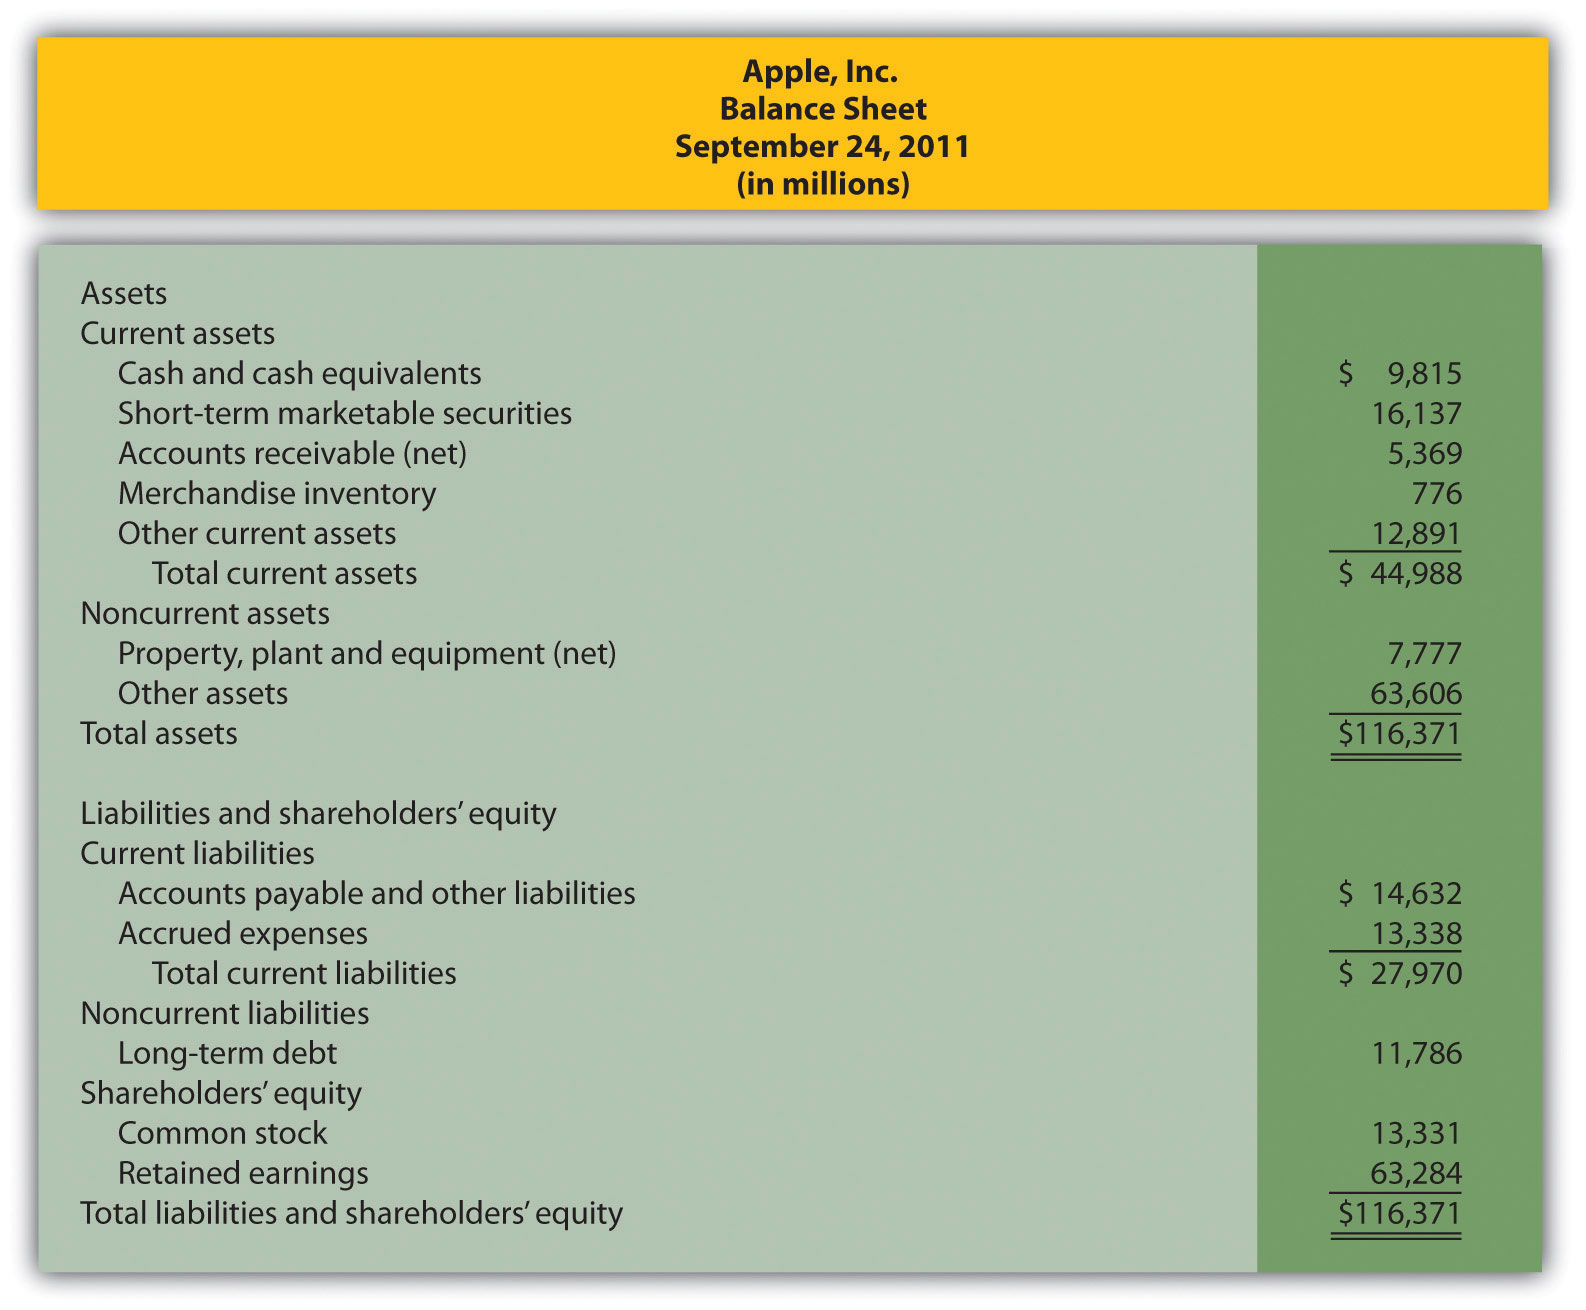 Financial analysis report of apple inc 2011